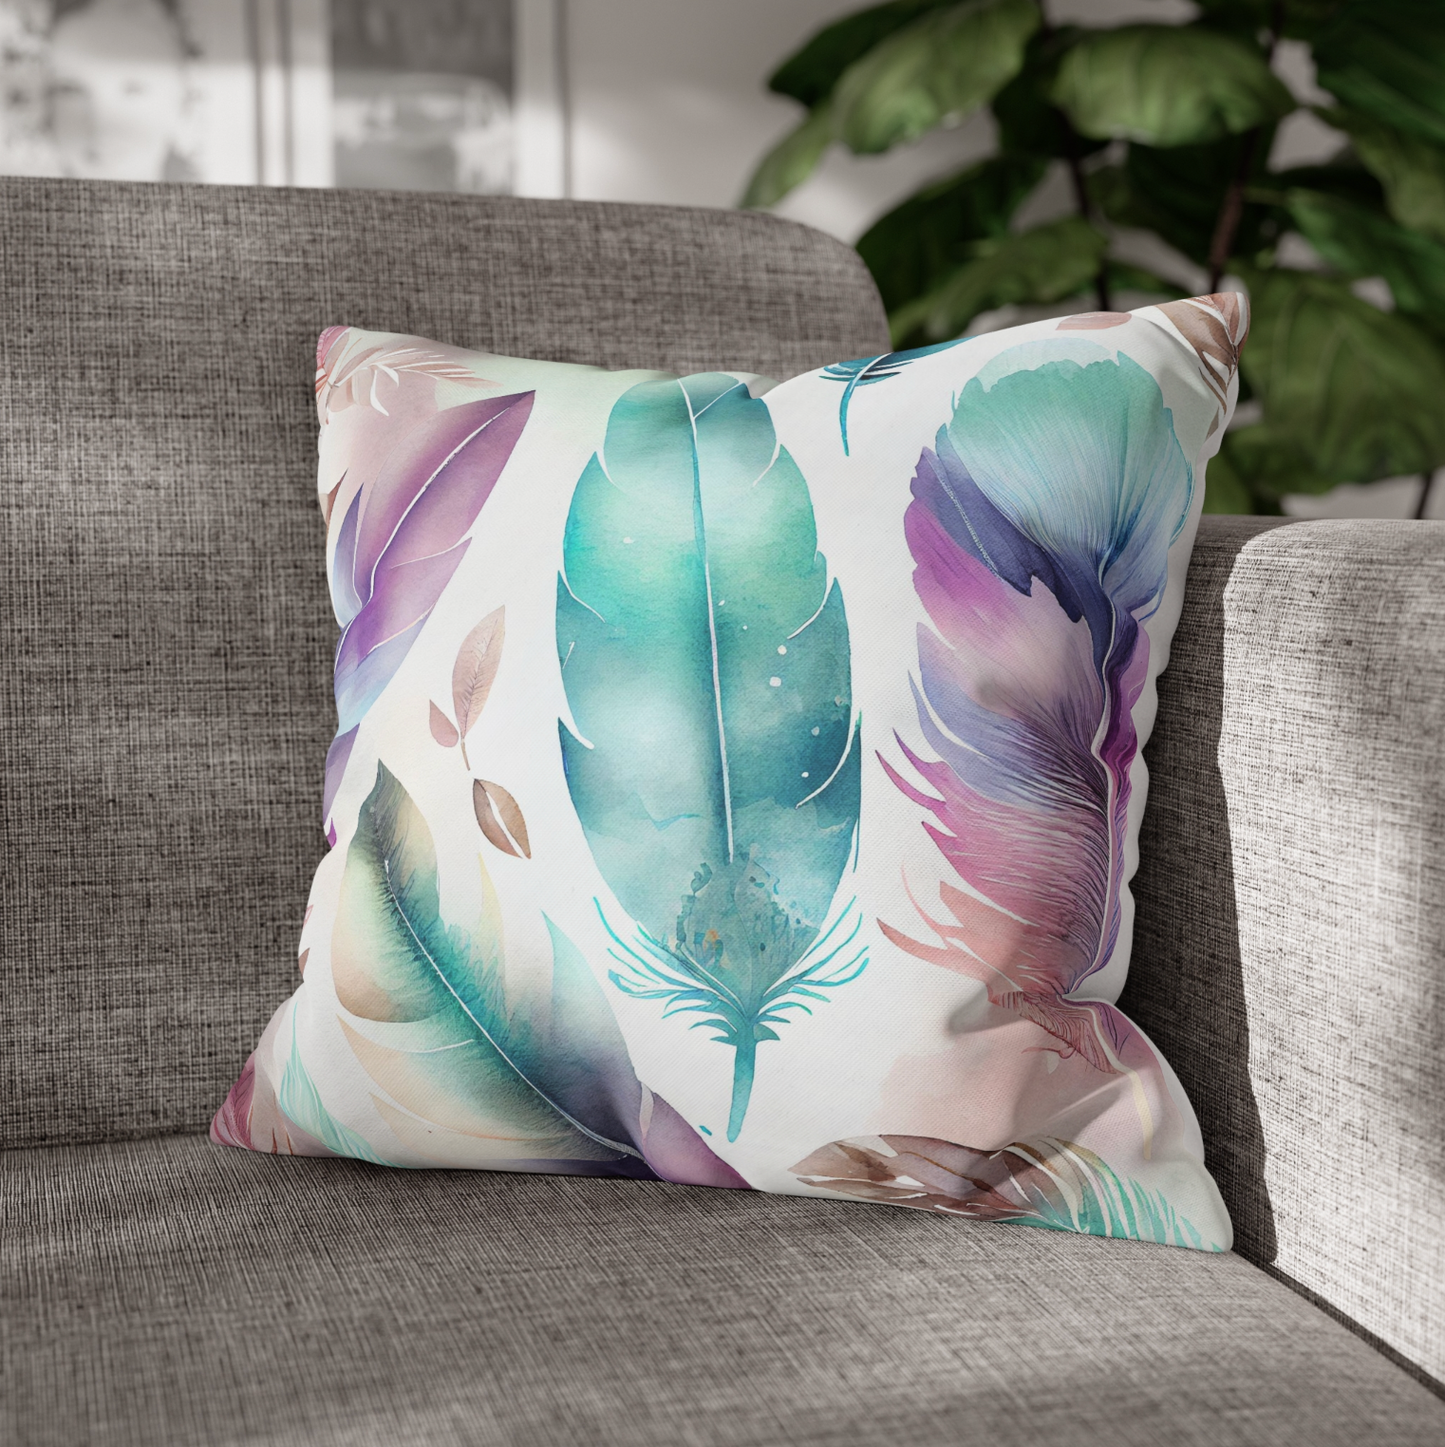 multicolor feather throw pillow, feather pattern accent throw pillow, feather design pillow sitting on a sofa or arm chair, feather pillow for your living room home decor